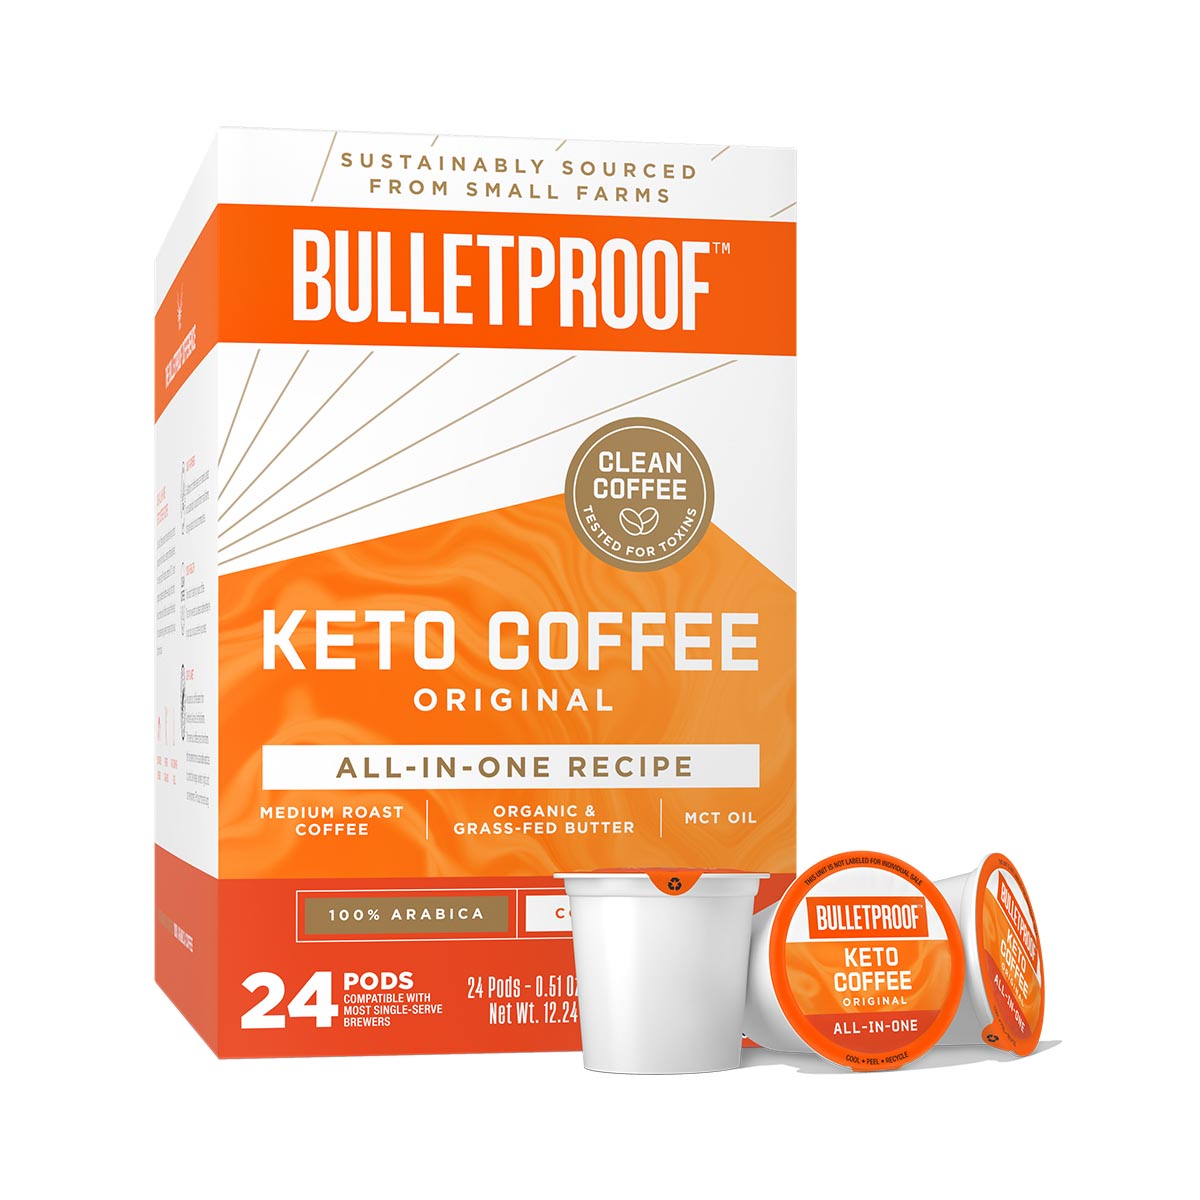 7 7 7 SUSTAINABLY SOURCED FROM SMALL FARMS CLEAN 1355 AN fire KETO COFFEE ORIGINAL ALL-IN-ONE RECIPE MEDIUM ROAST ORGANIC e COFFEE SEPIET GRASS-FED BUTTER L3 COFFEE ORIGINAL P R 